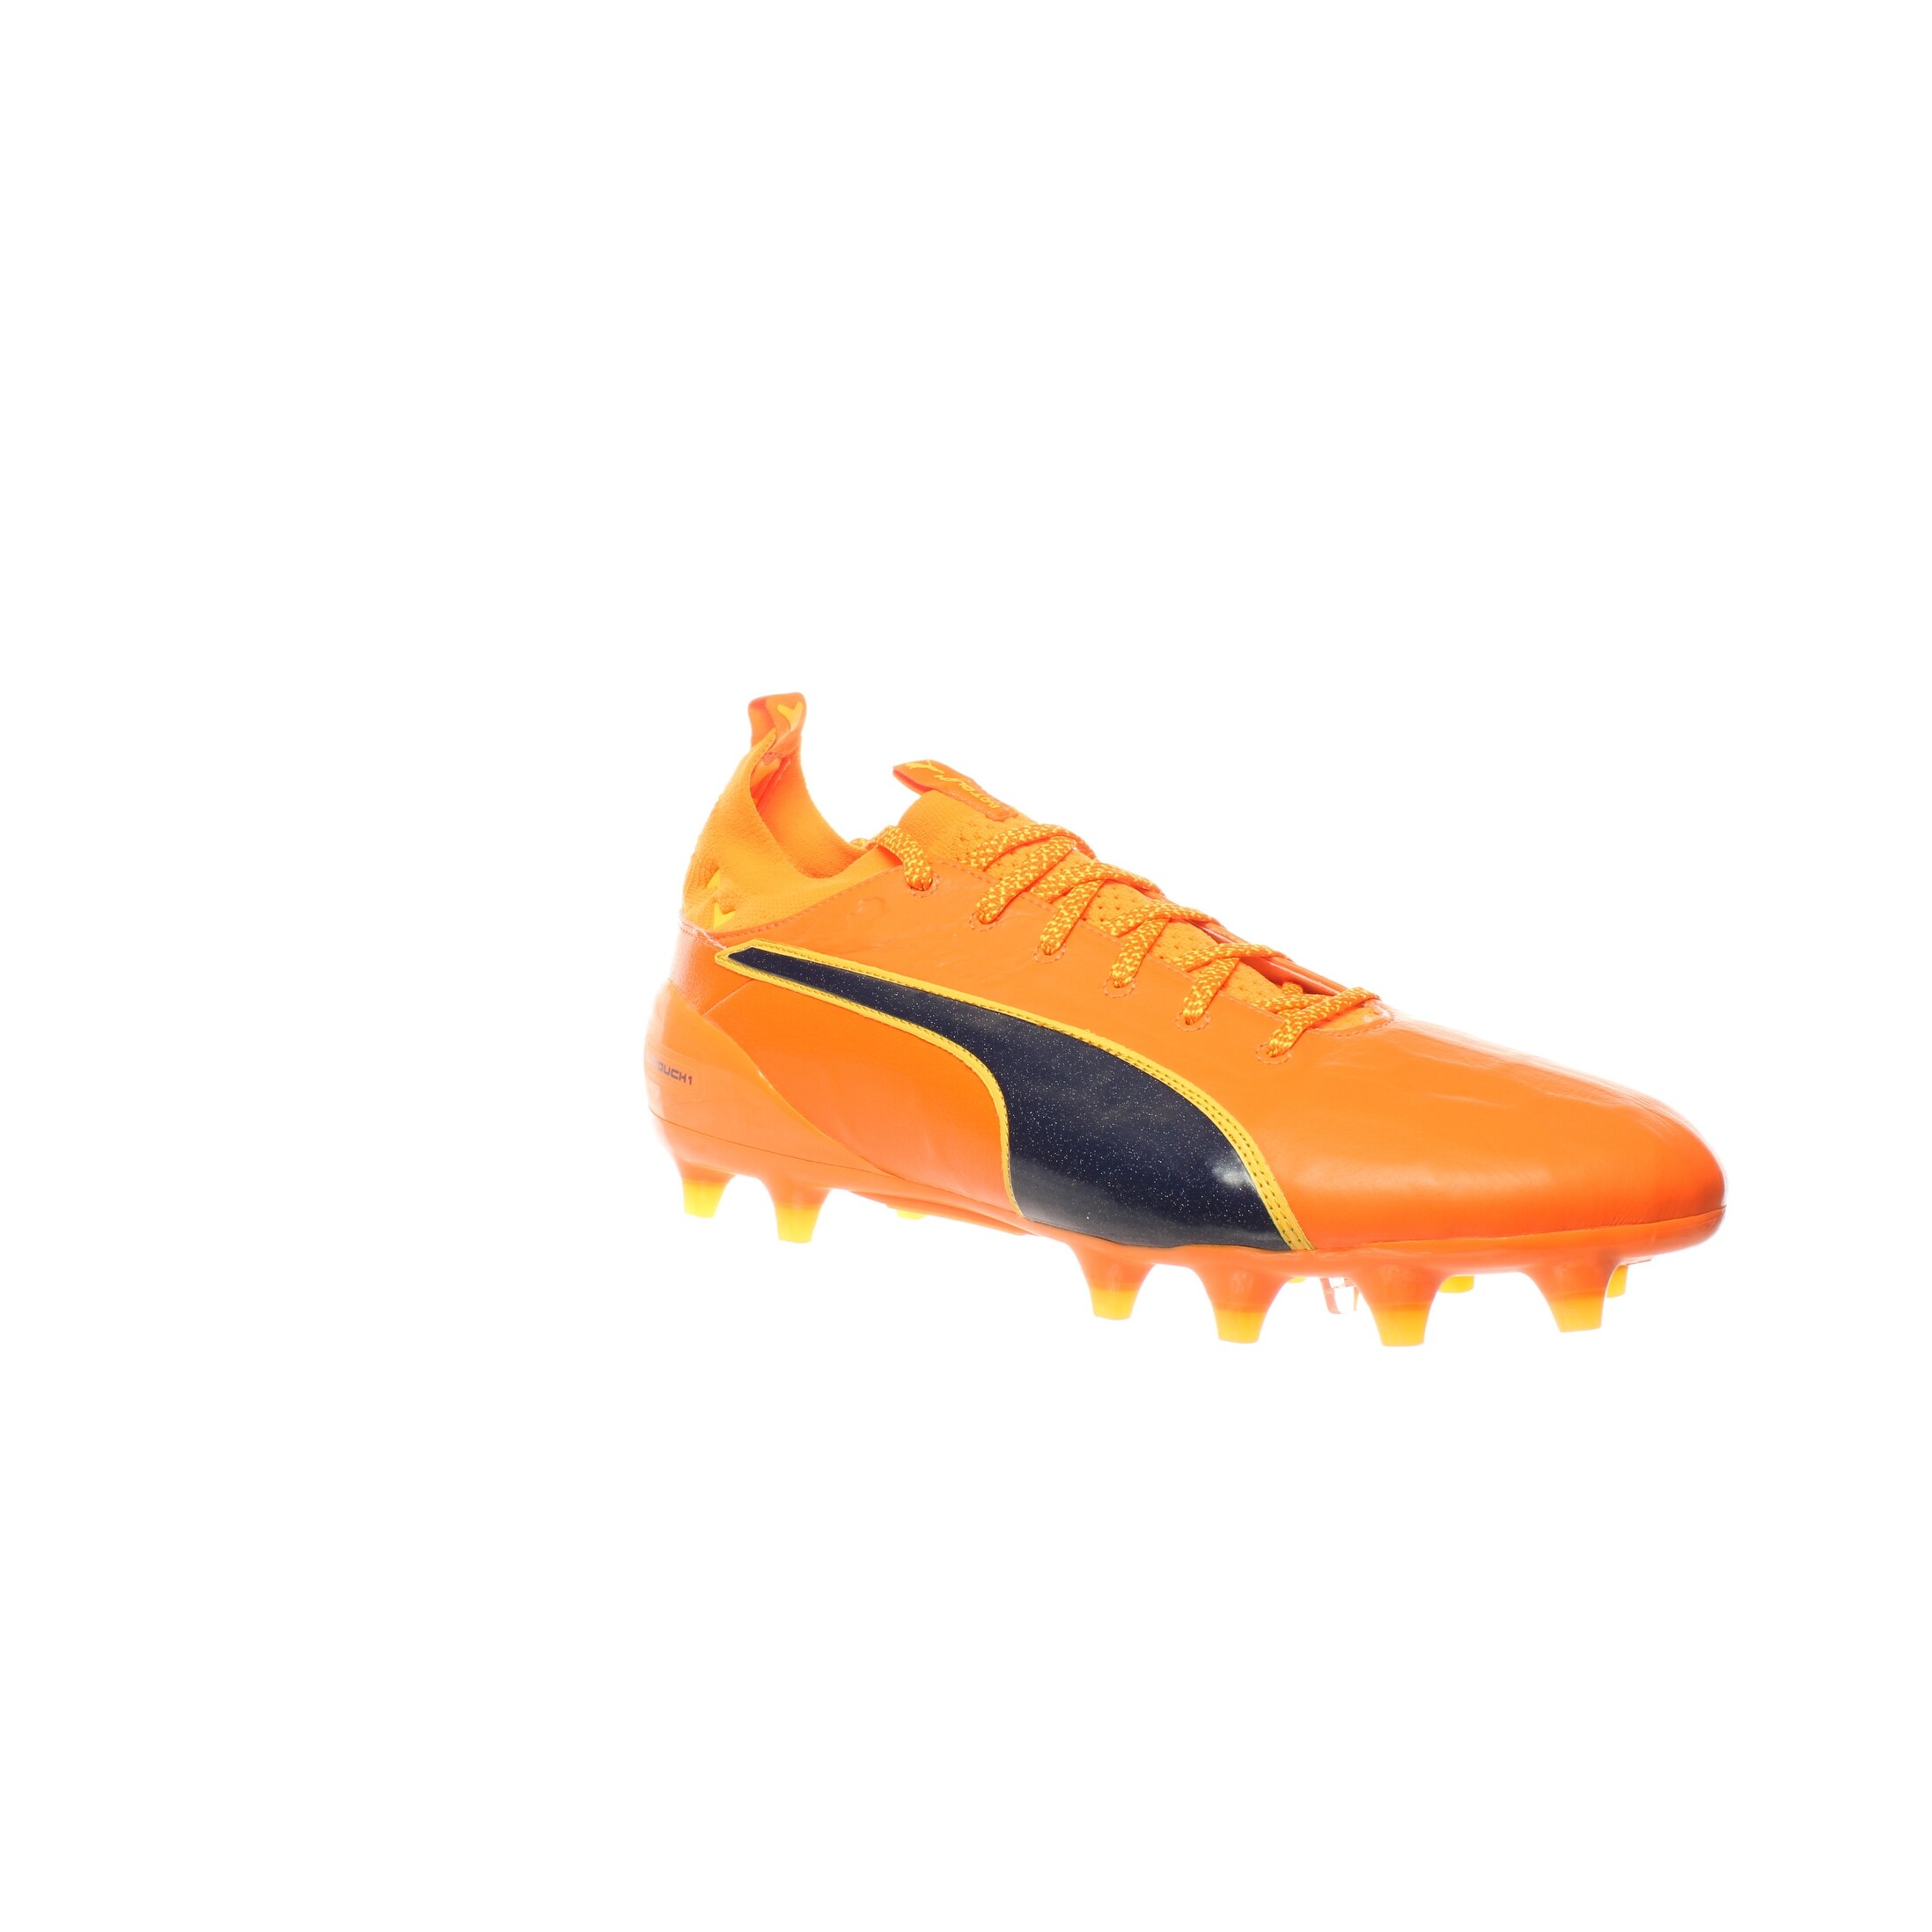 soccer cleats size 11.5